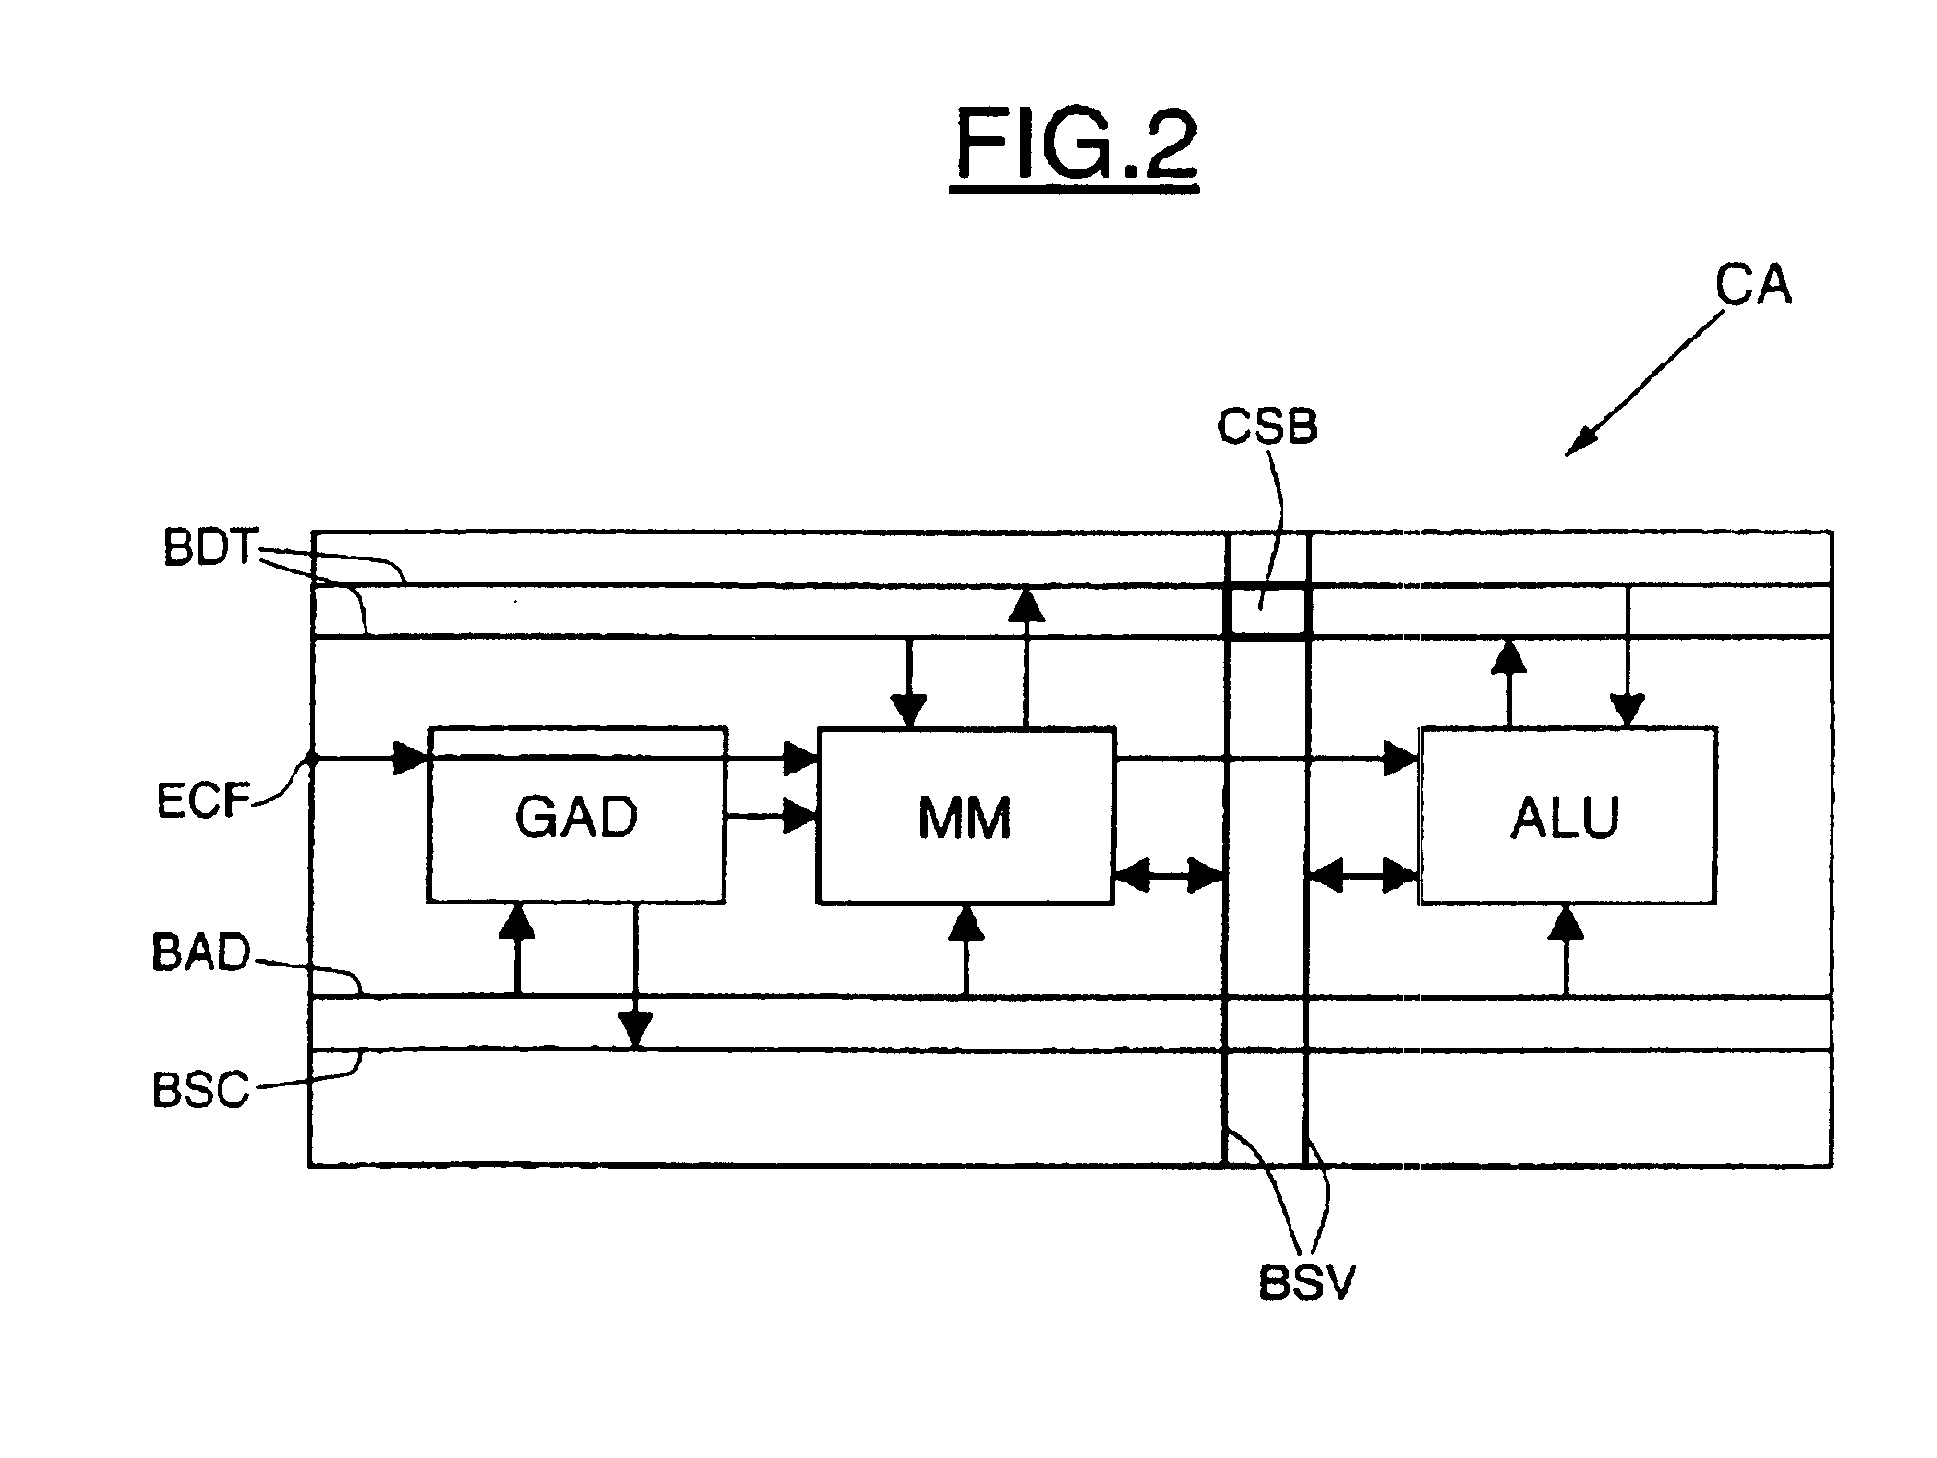 Configurable electronic device with mixed granularity